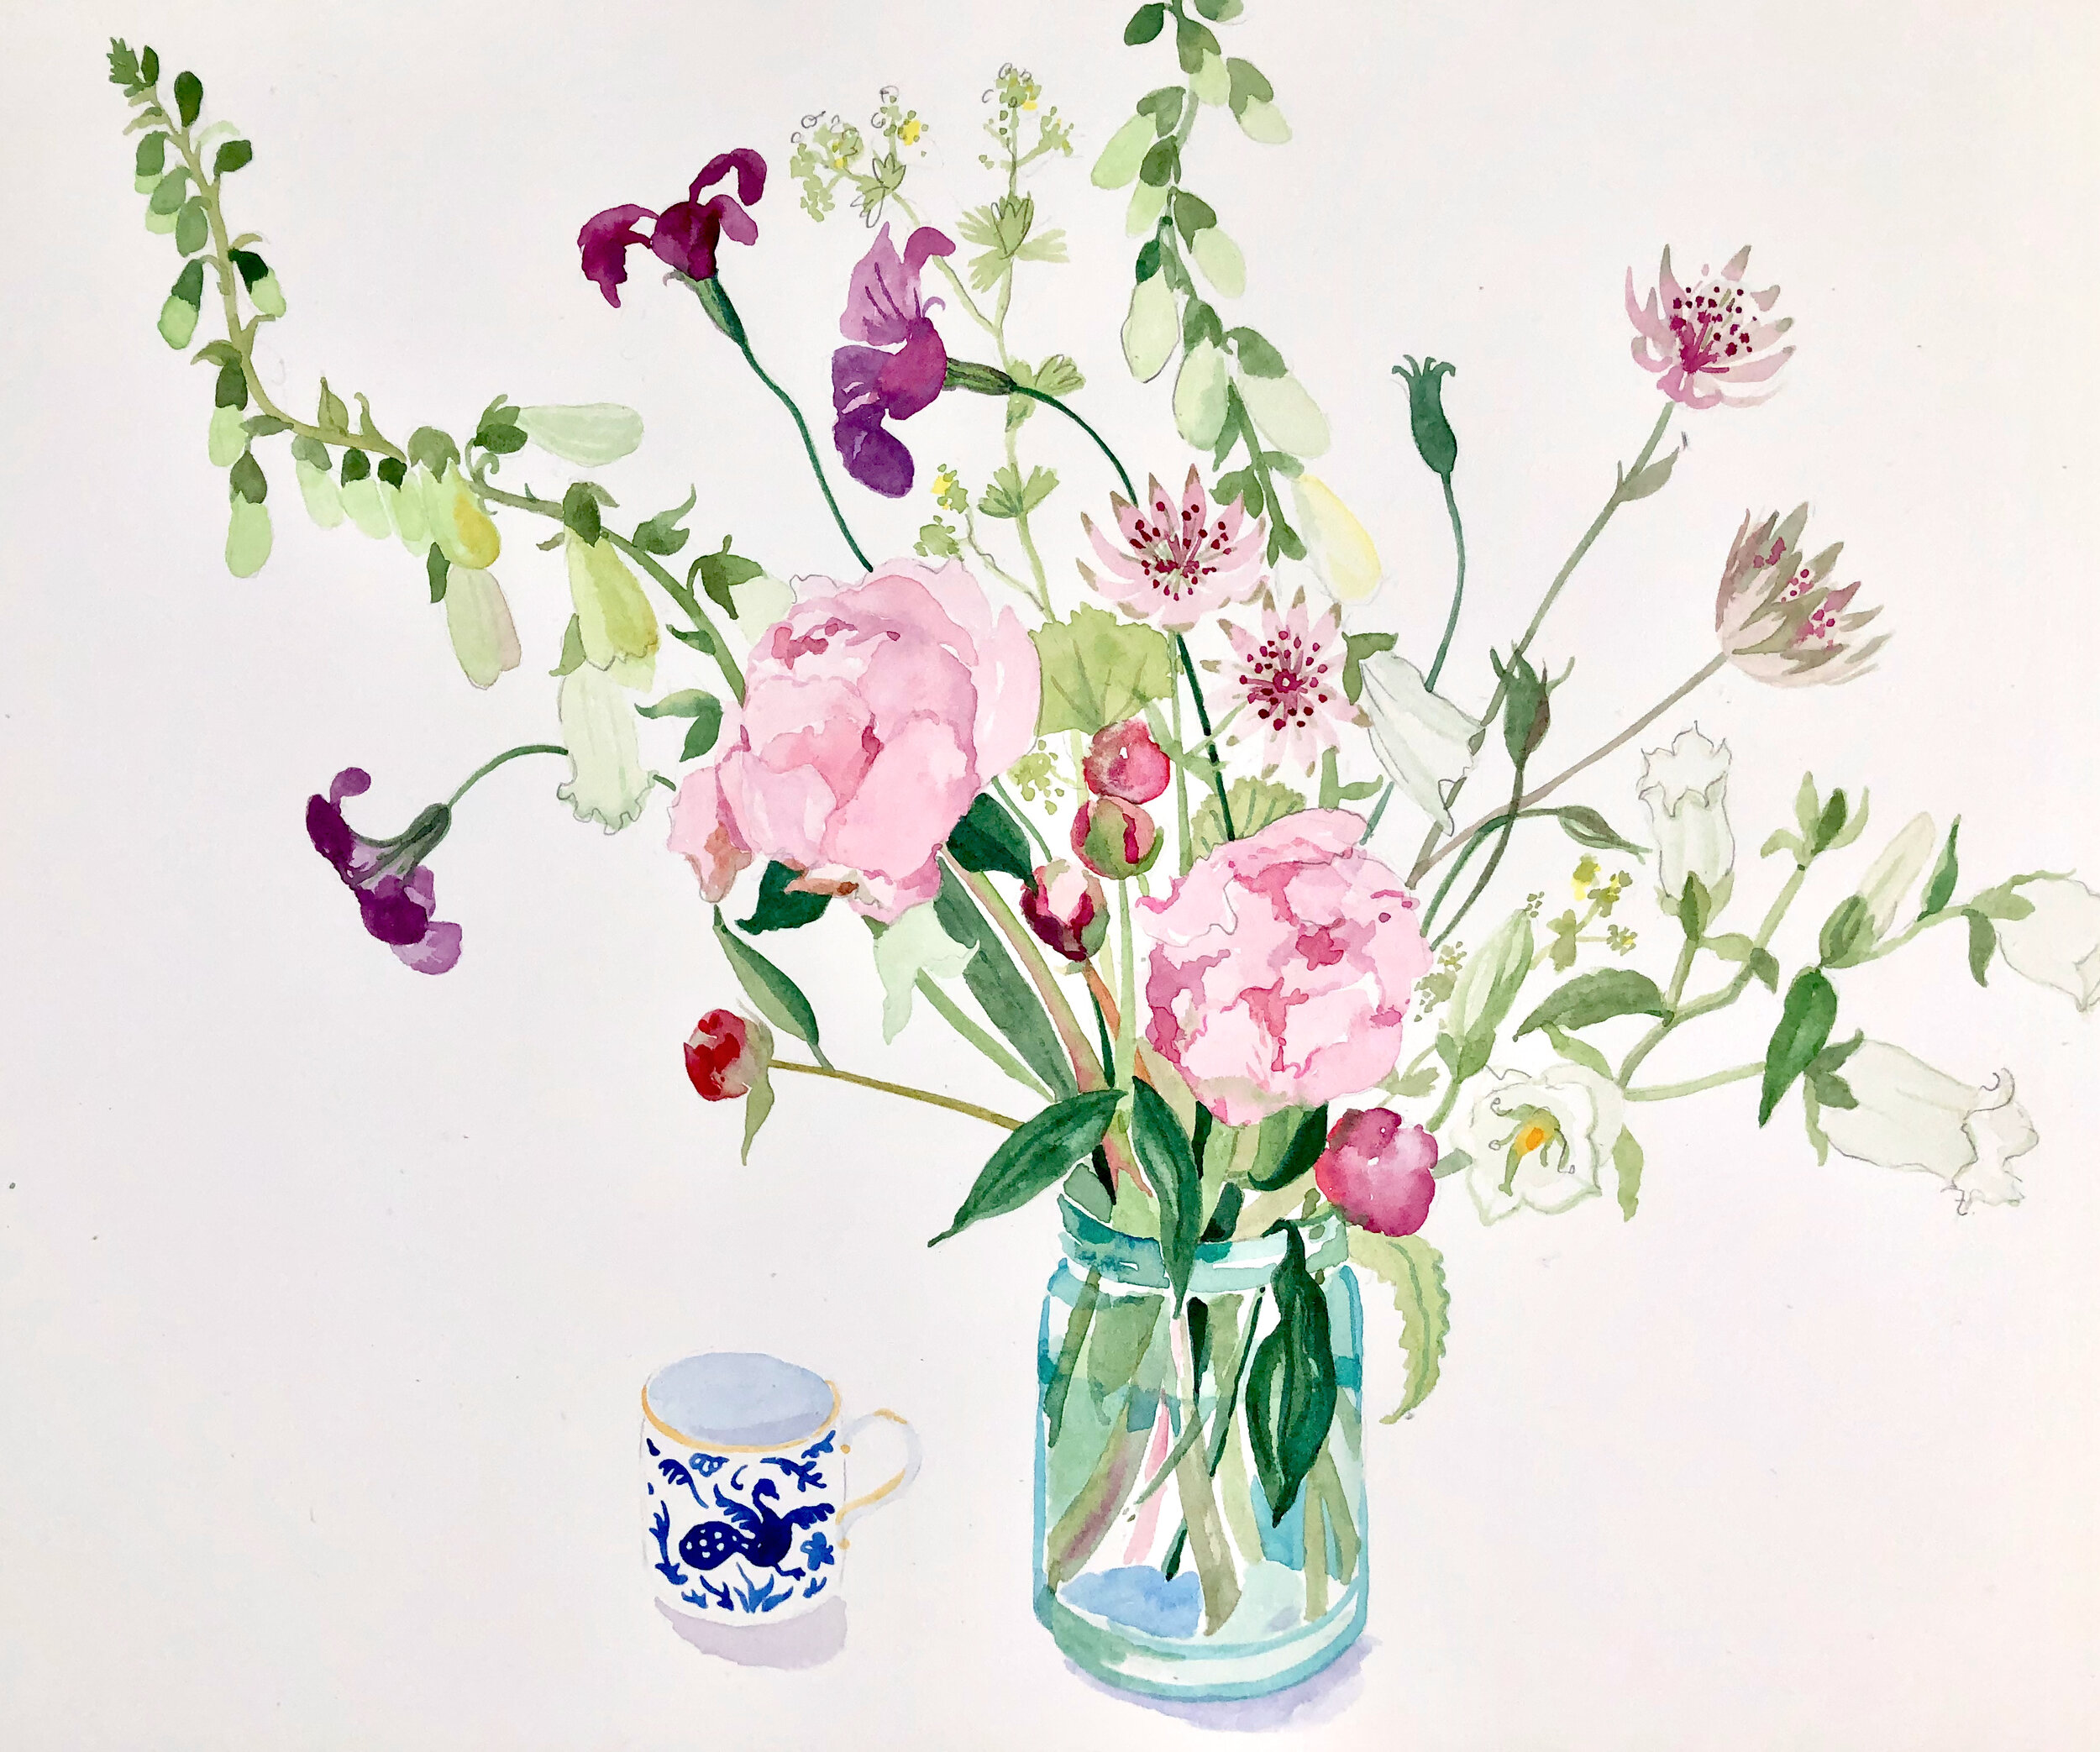 Peonies and Alliums, watercolour, 31 x 41 cm